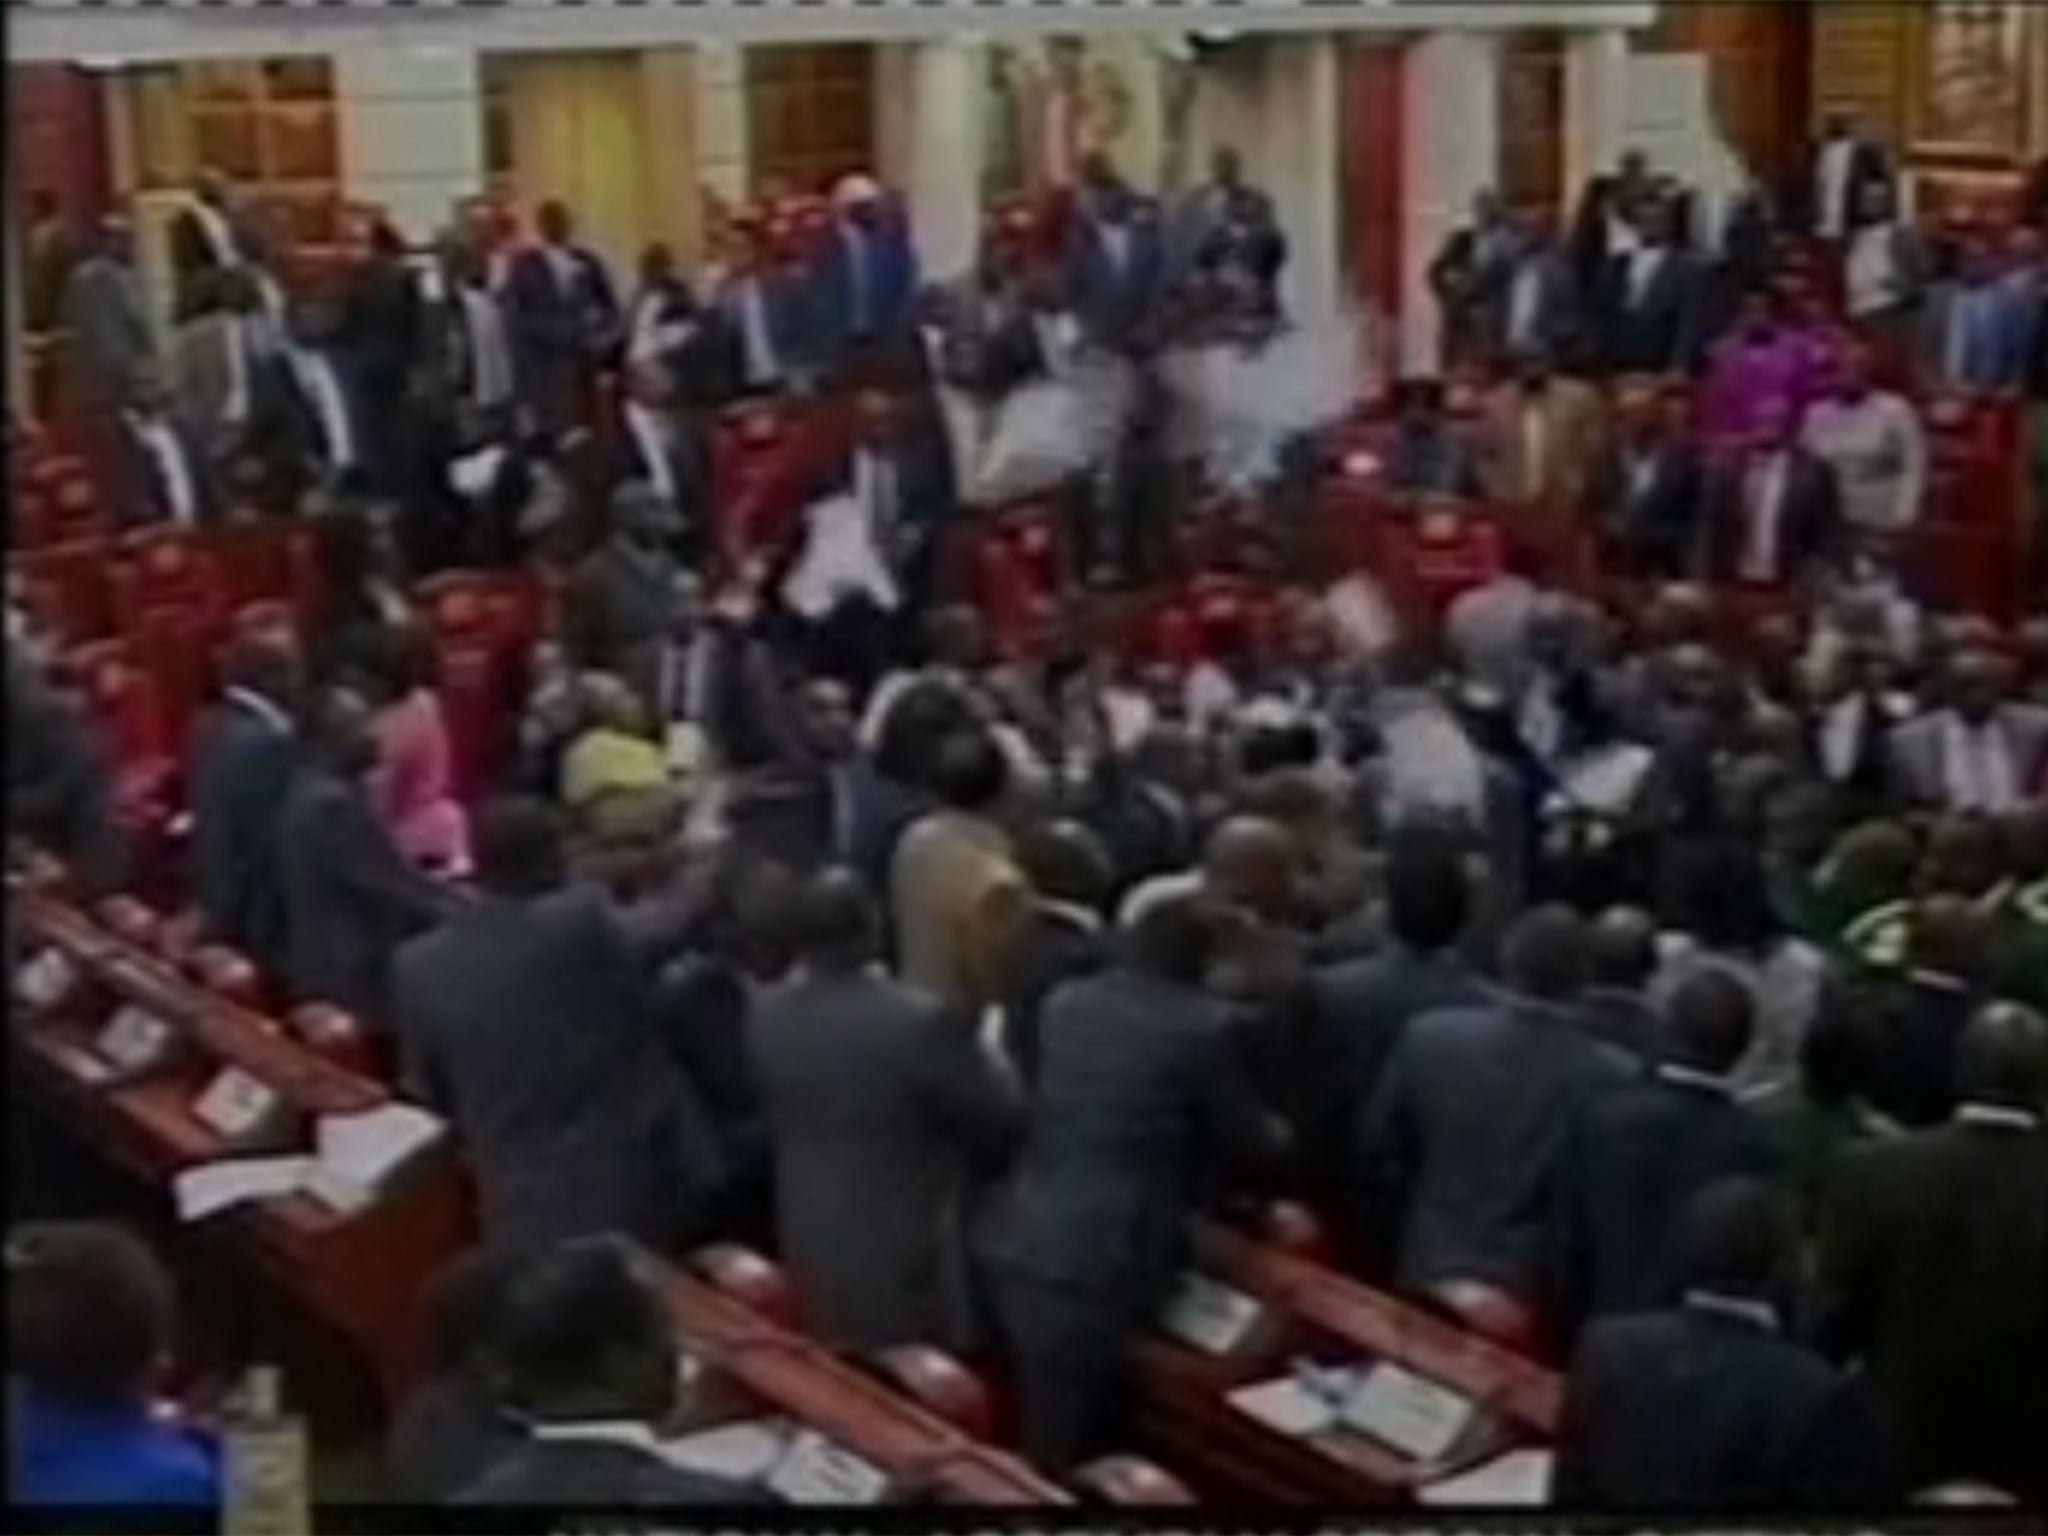 In Kenya, the opposition party decided that words just were not powerful enough to express their displeasure at new terrorism-related laws. So they yelled, tore up and threw papers and shouted down the speaker of the country's parliament.